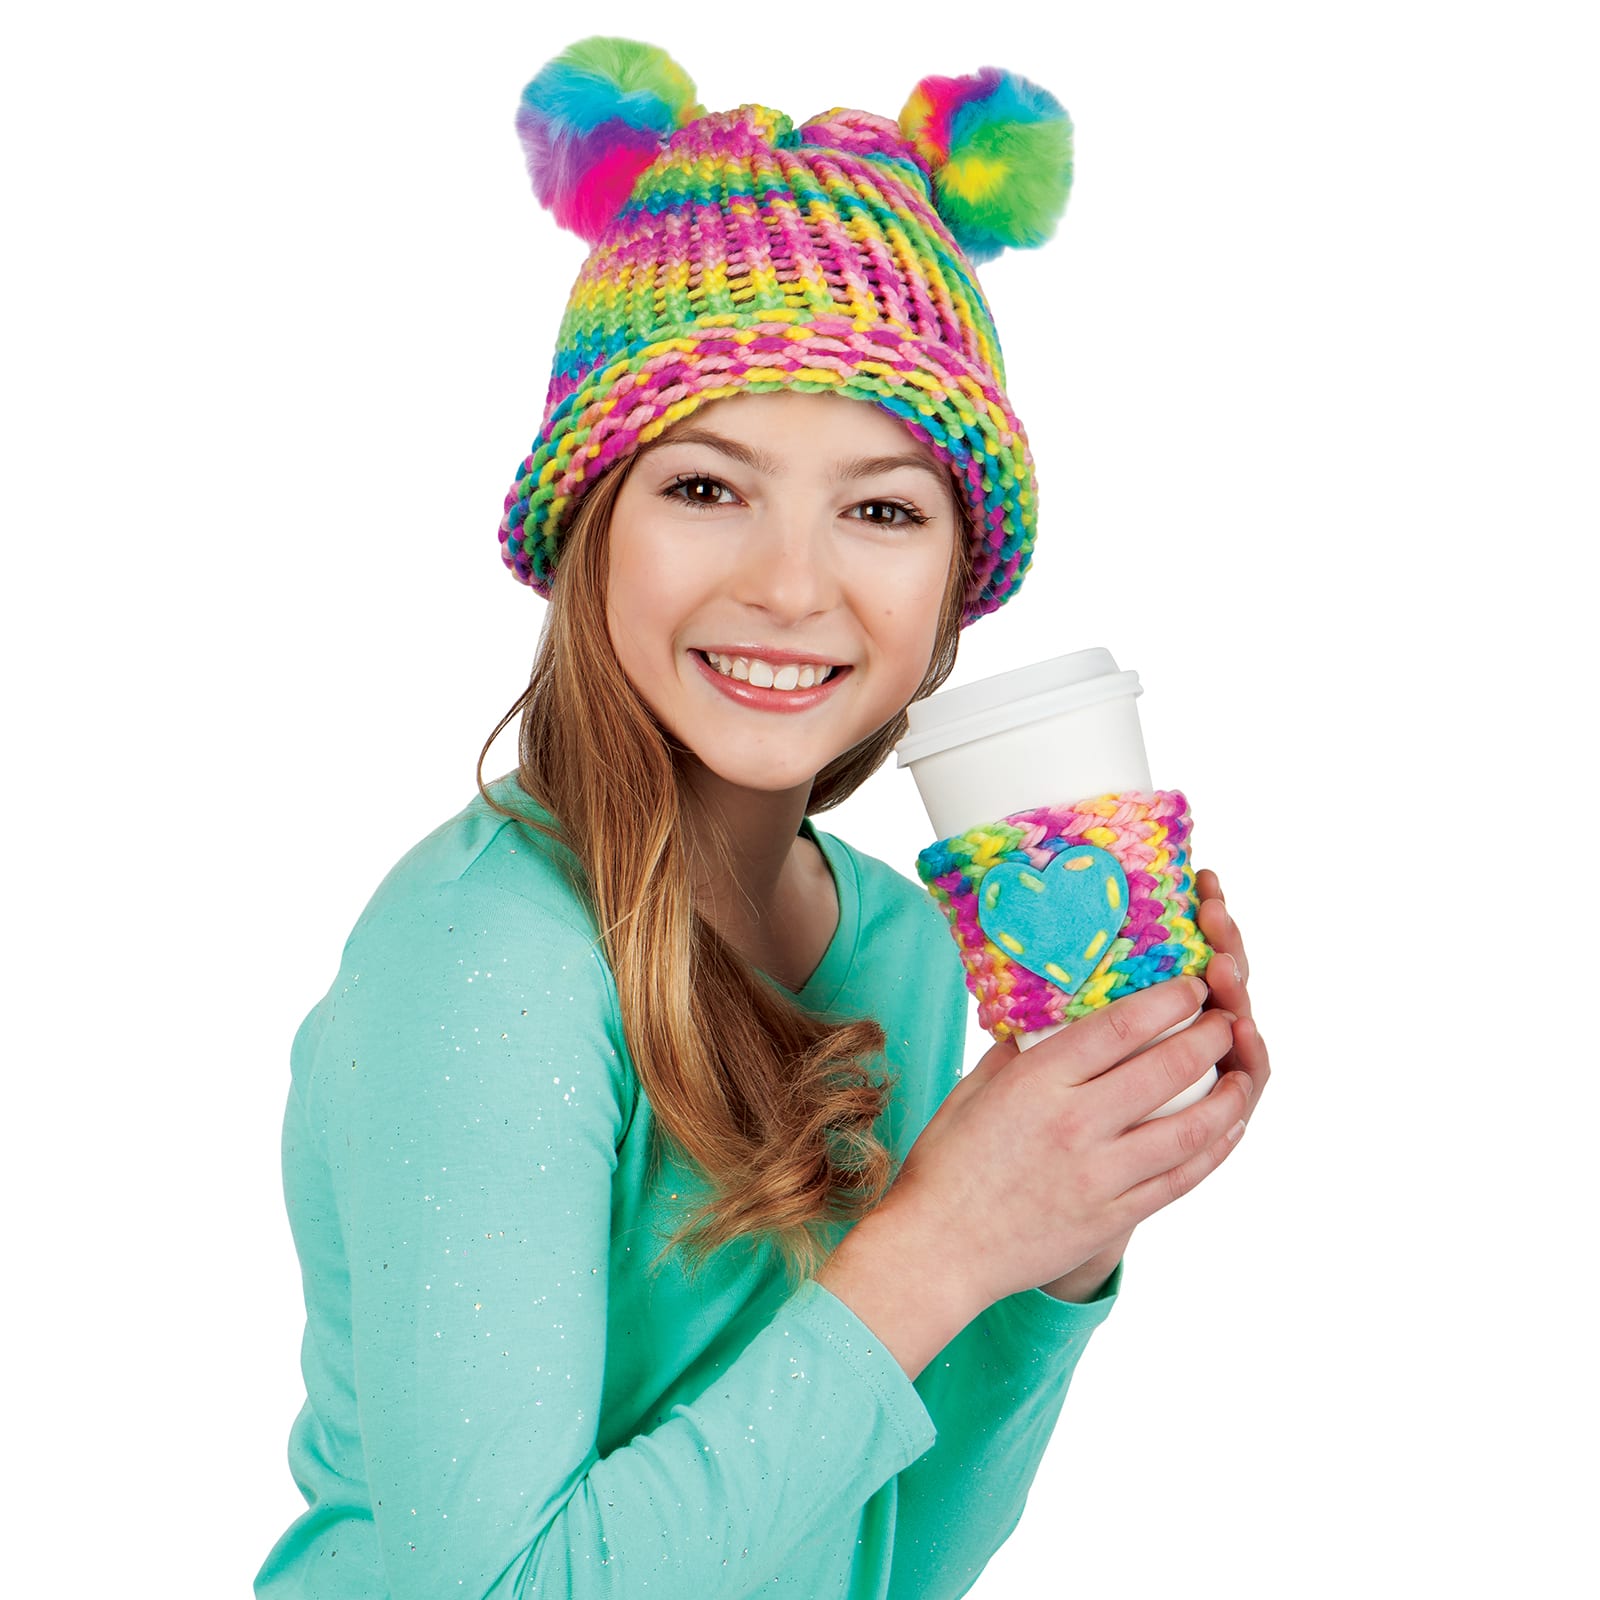 Creativity for Kids&#xAE; Quick Knit Loom